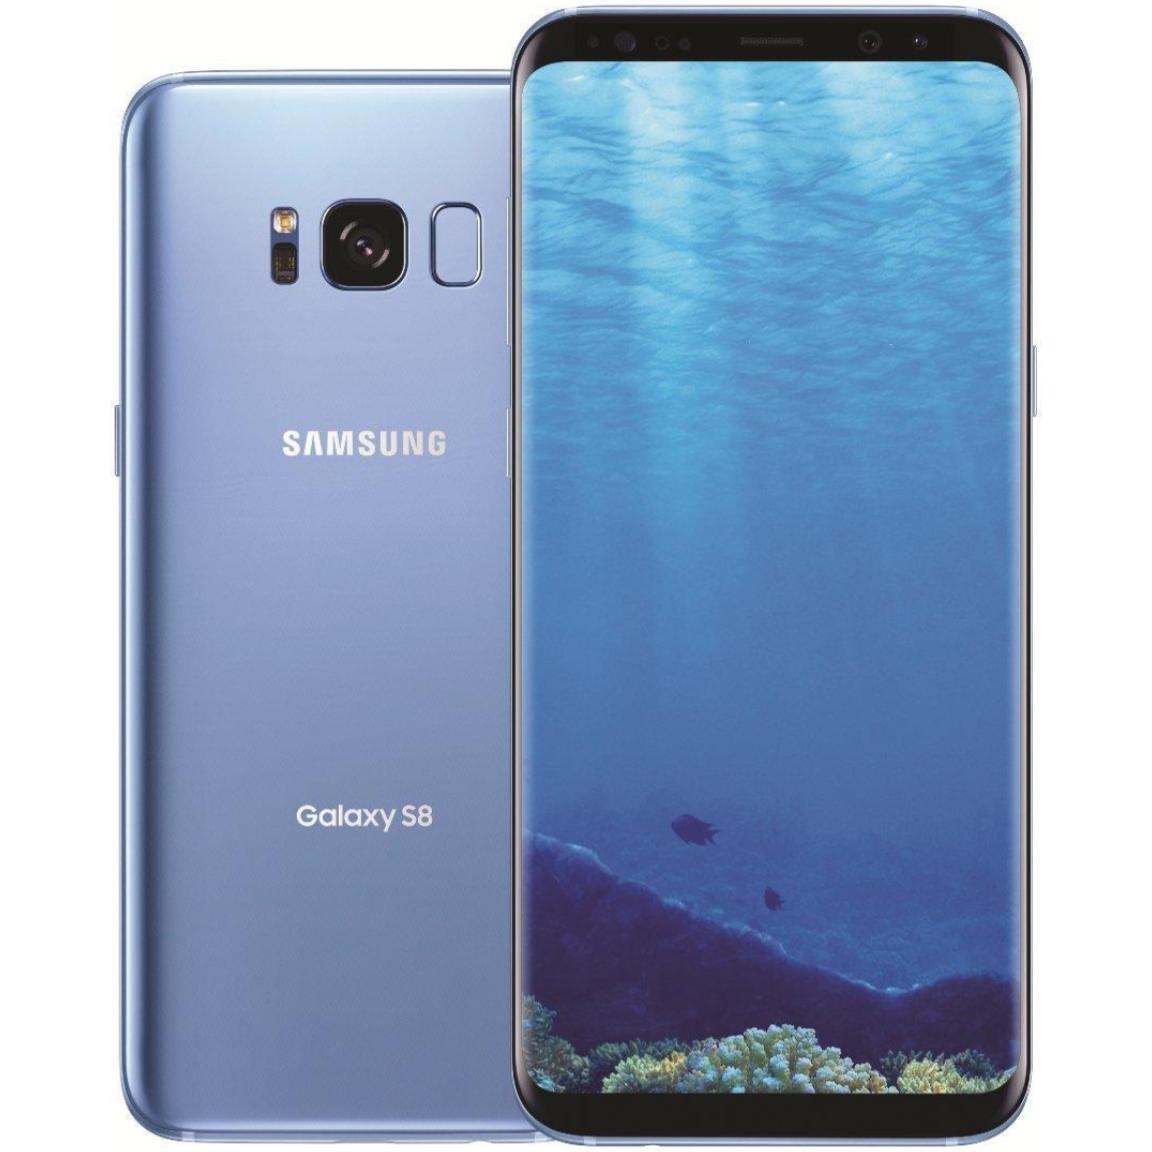 Used Samsung Galaxy S8 - 64GB - Midnight Black - Fully Unlocked - Verizon / T-Mobile / Global - Android Smartphone - Grade A (LCD Shadow) - image 1 of 3